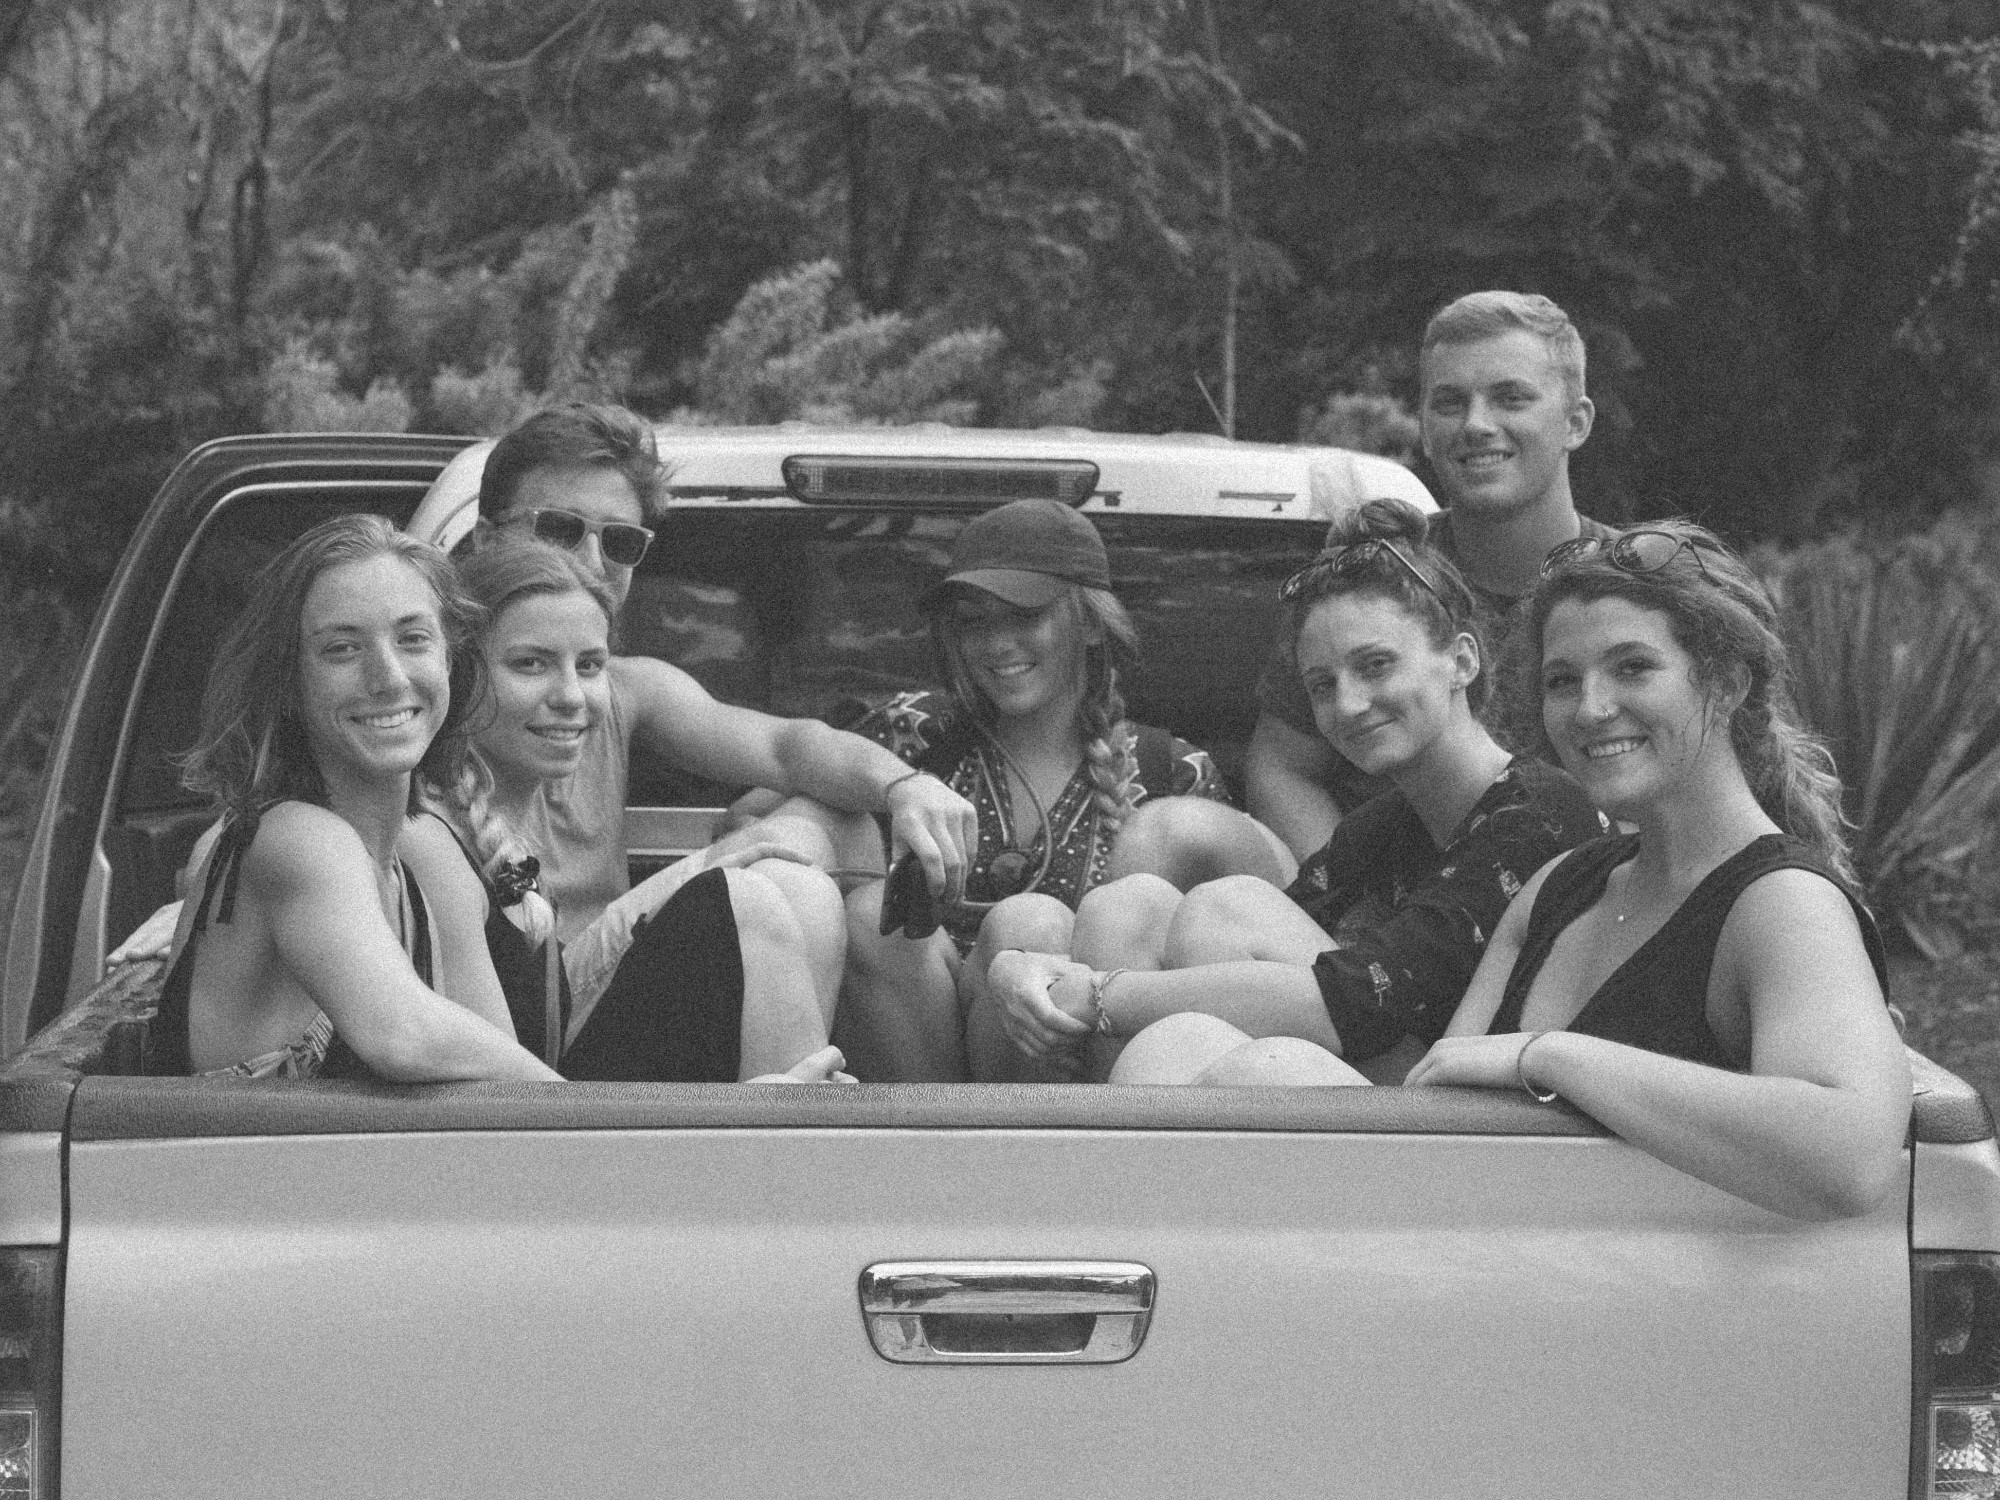 Group of friends smiling in back of ute truck.